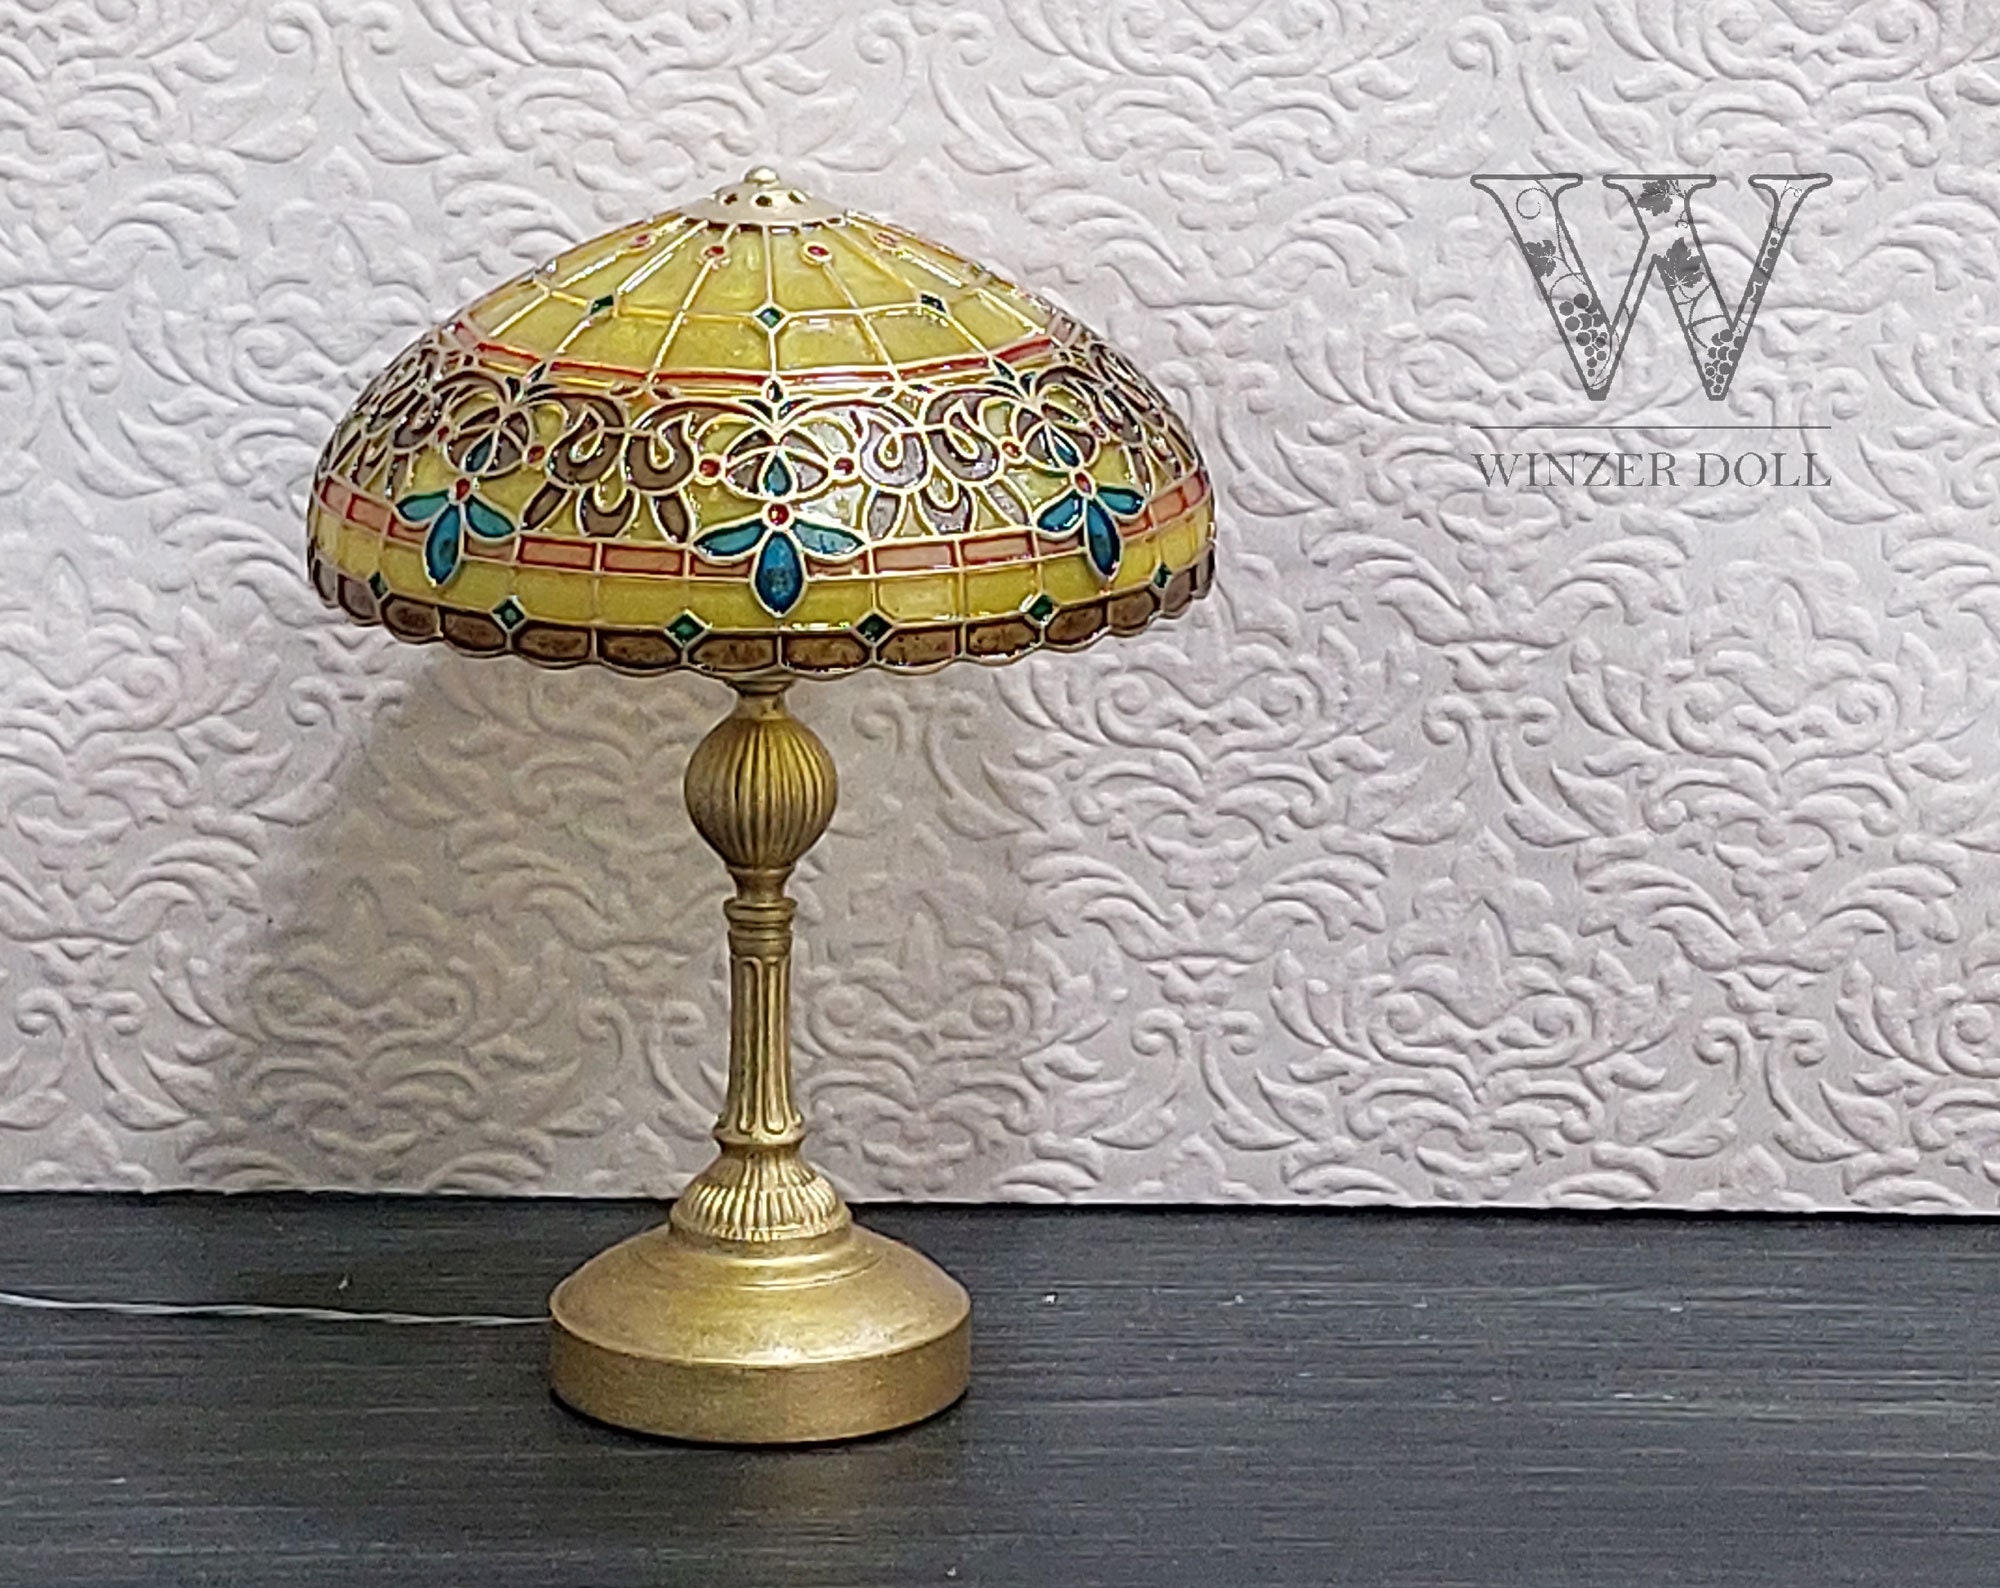 Tiffany Lamp 16inch Table Lights Stained Glass Home Decor 